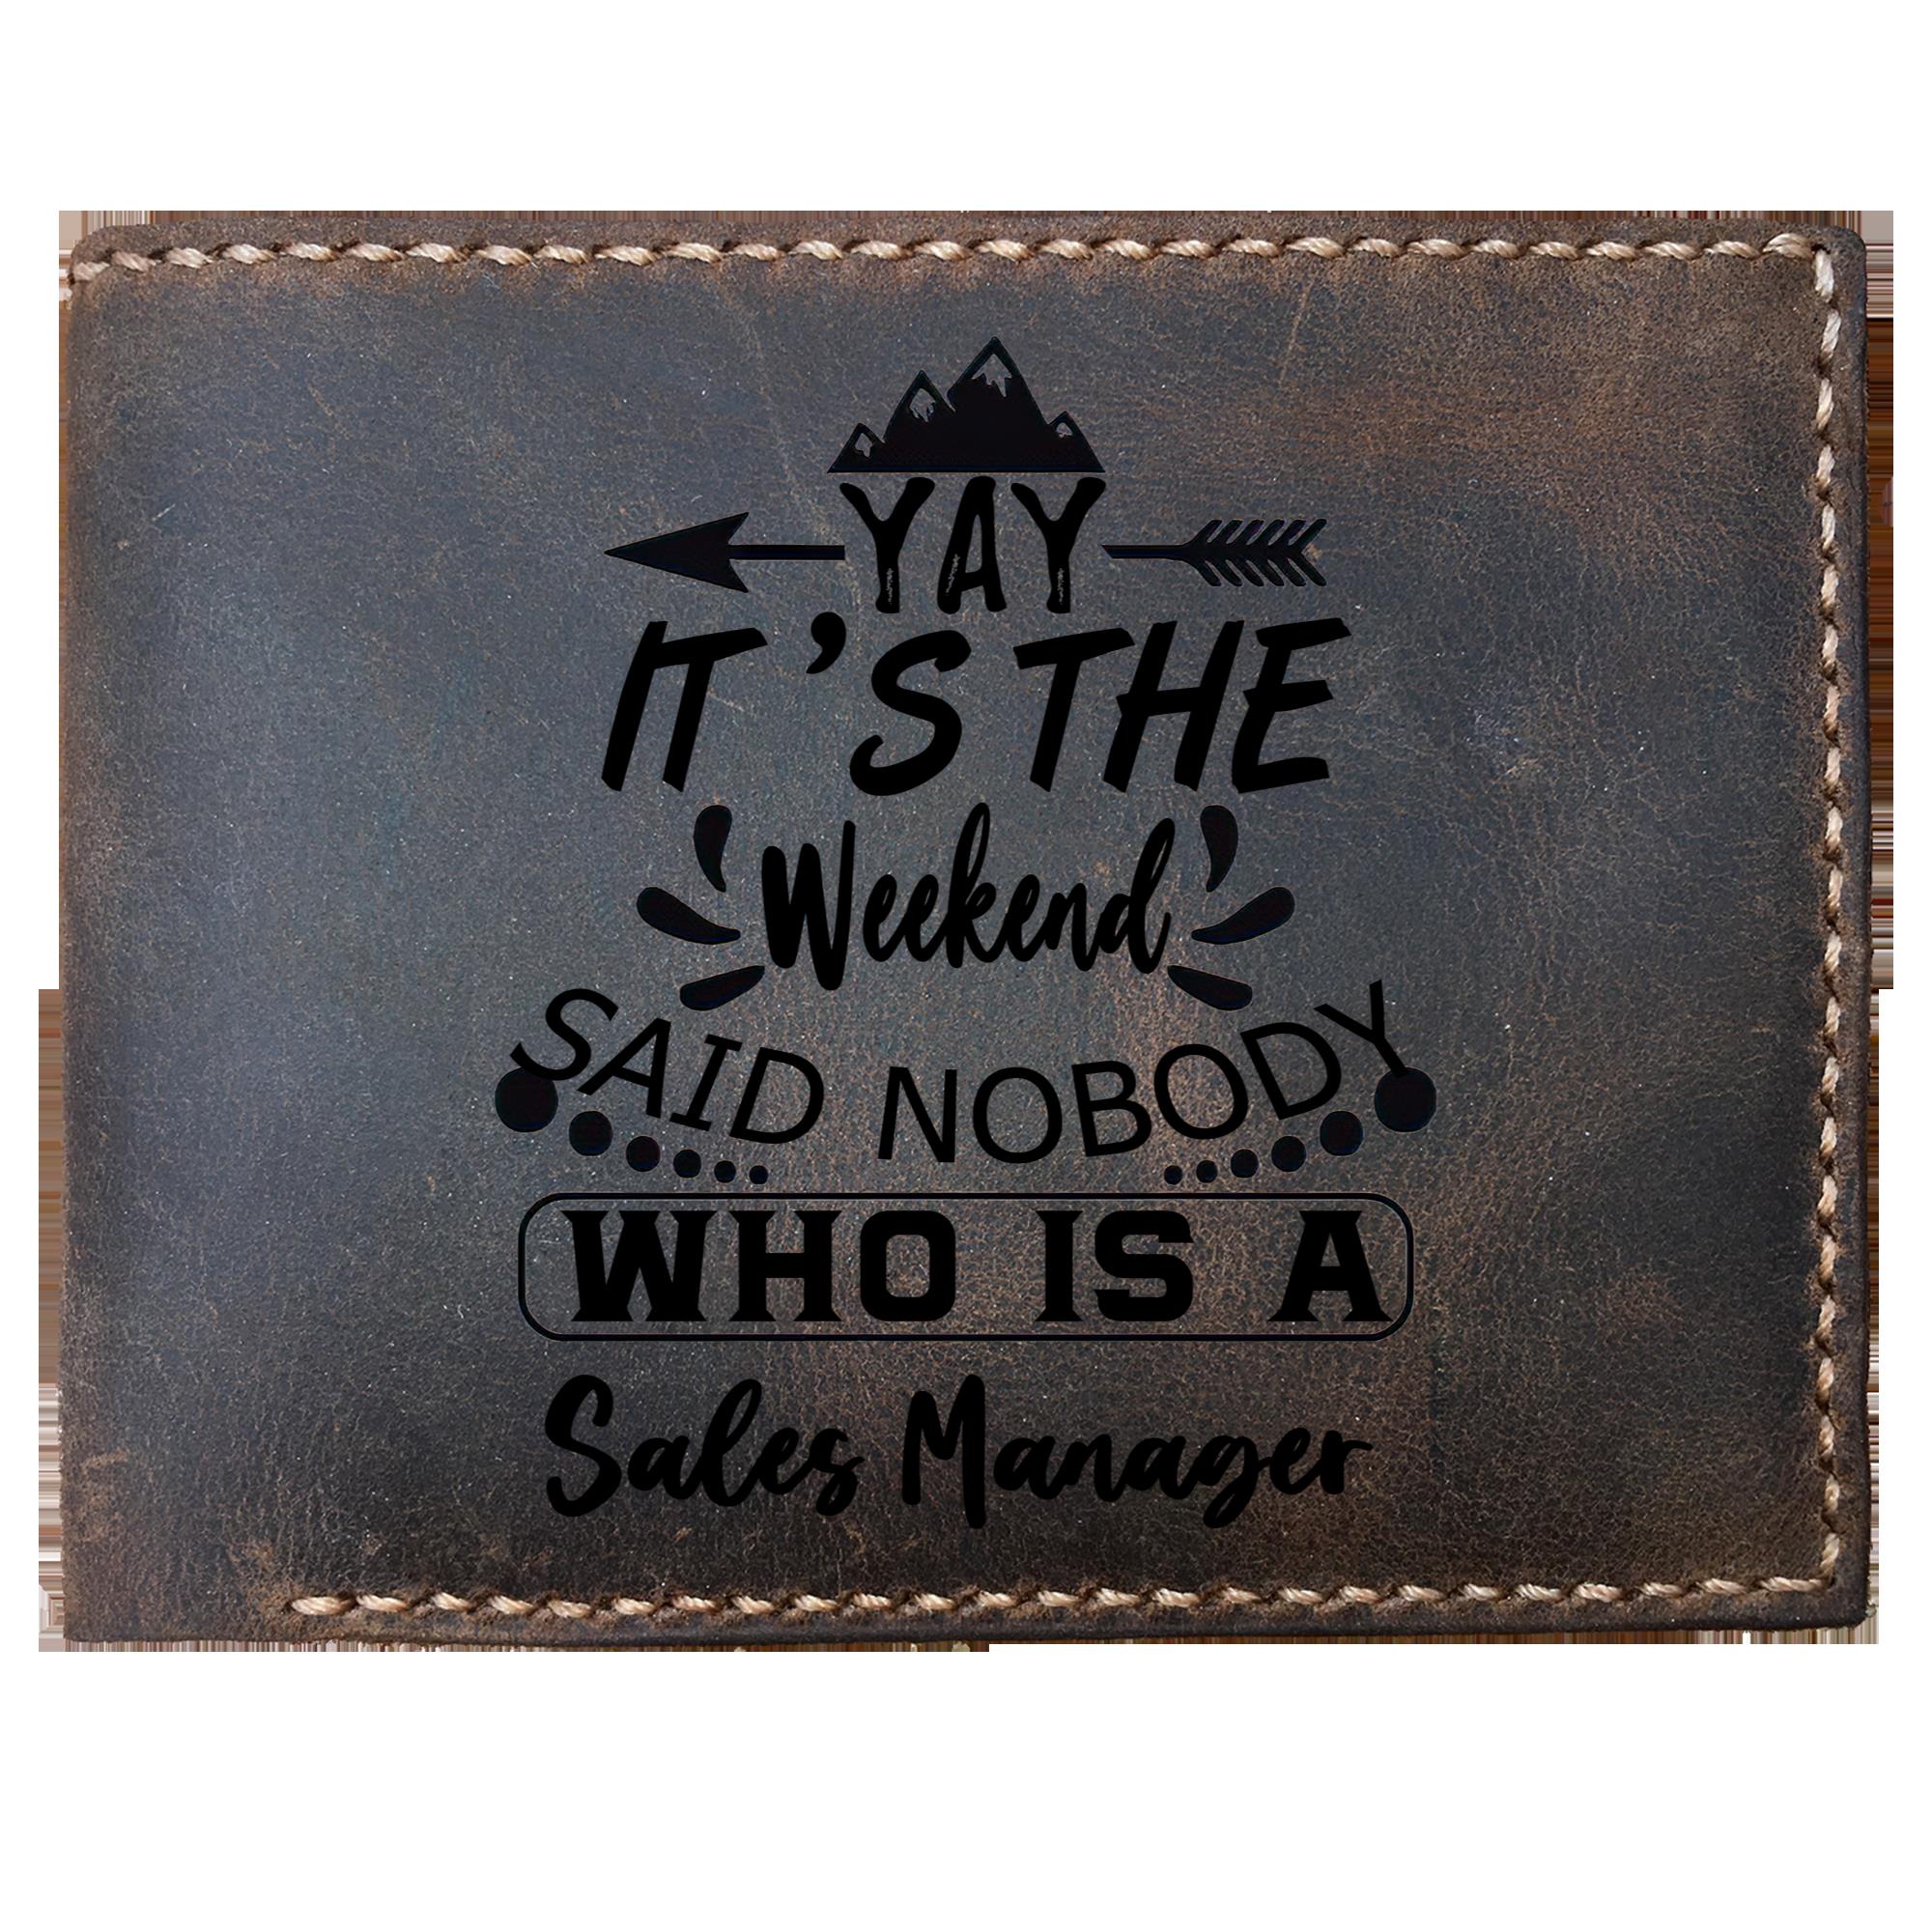 Skitongifts Funny Custom Laser Engraved Bifold Leather Wallet For Men, It's The Weekend Said Nobody Who Is A Sales Manager, Father's Day Gifts